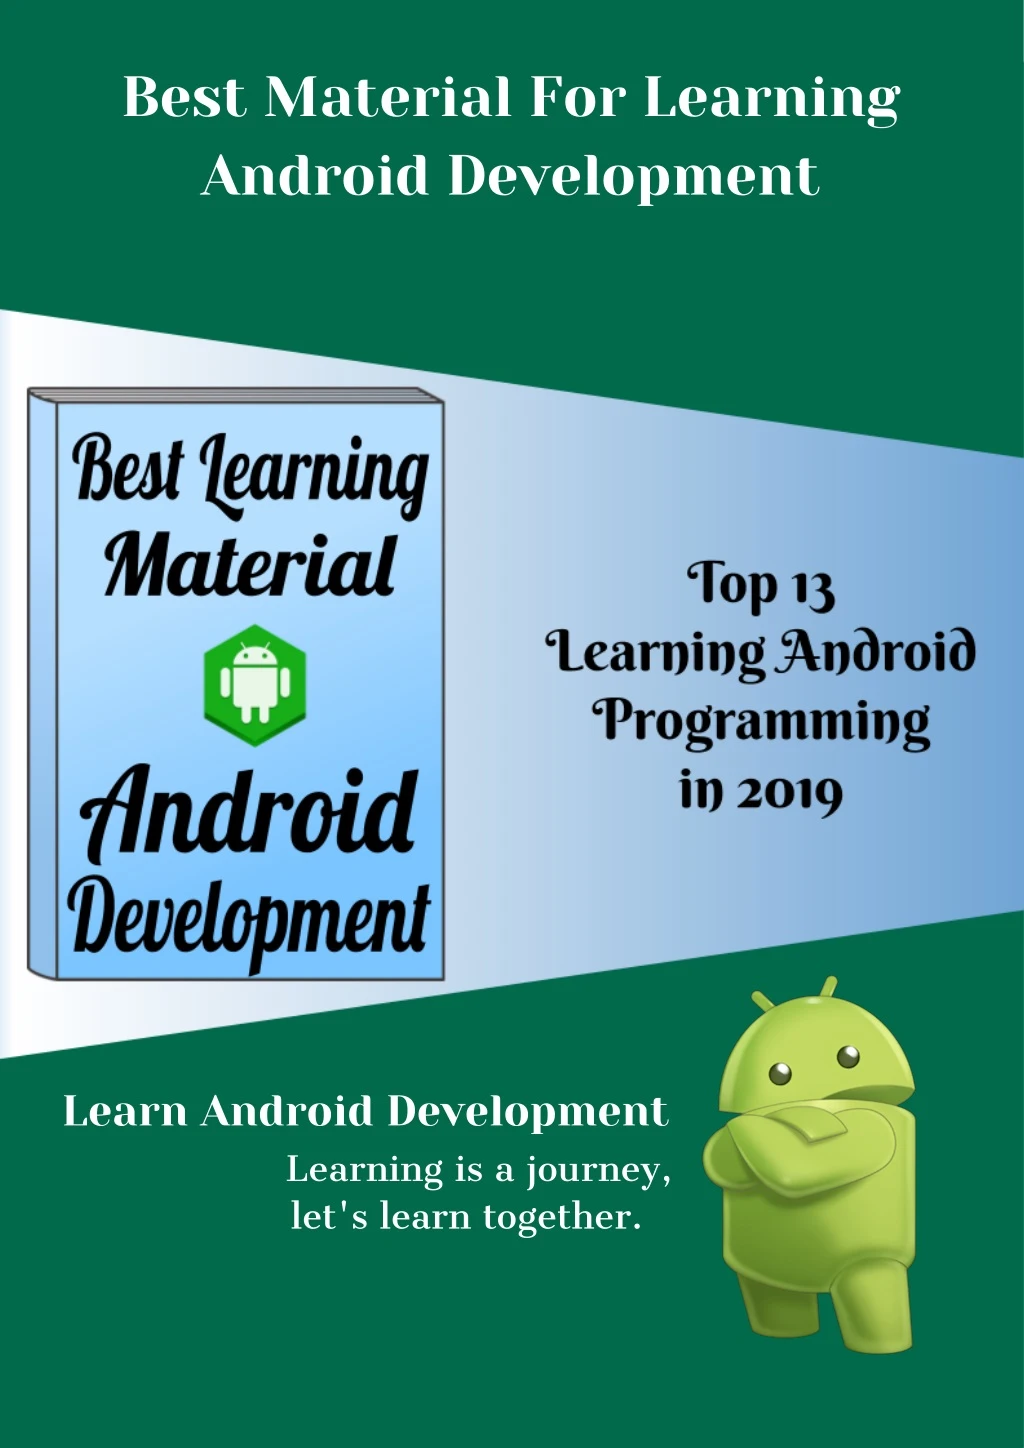 best material for learning android development